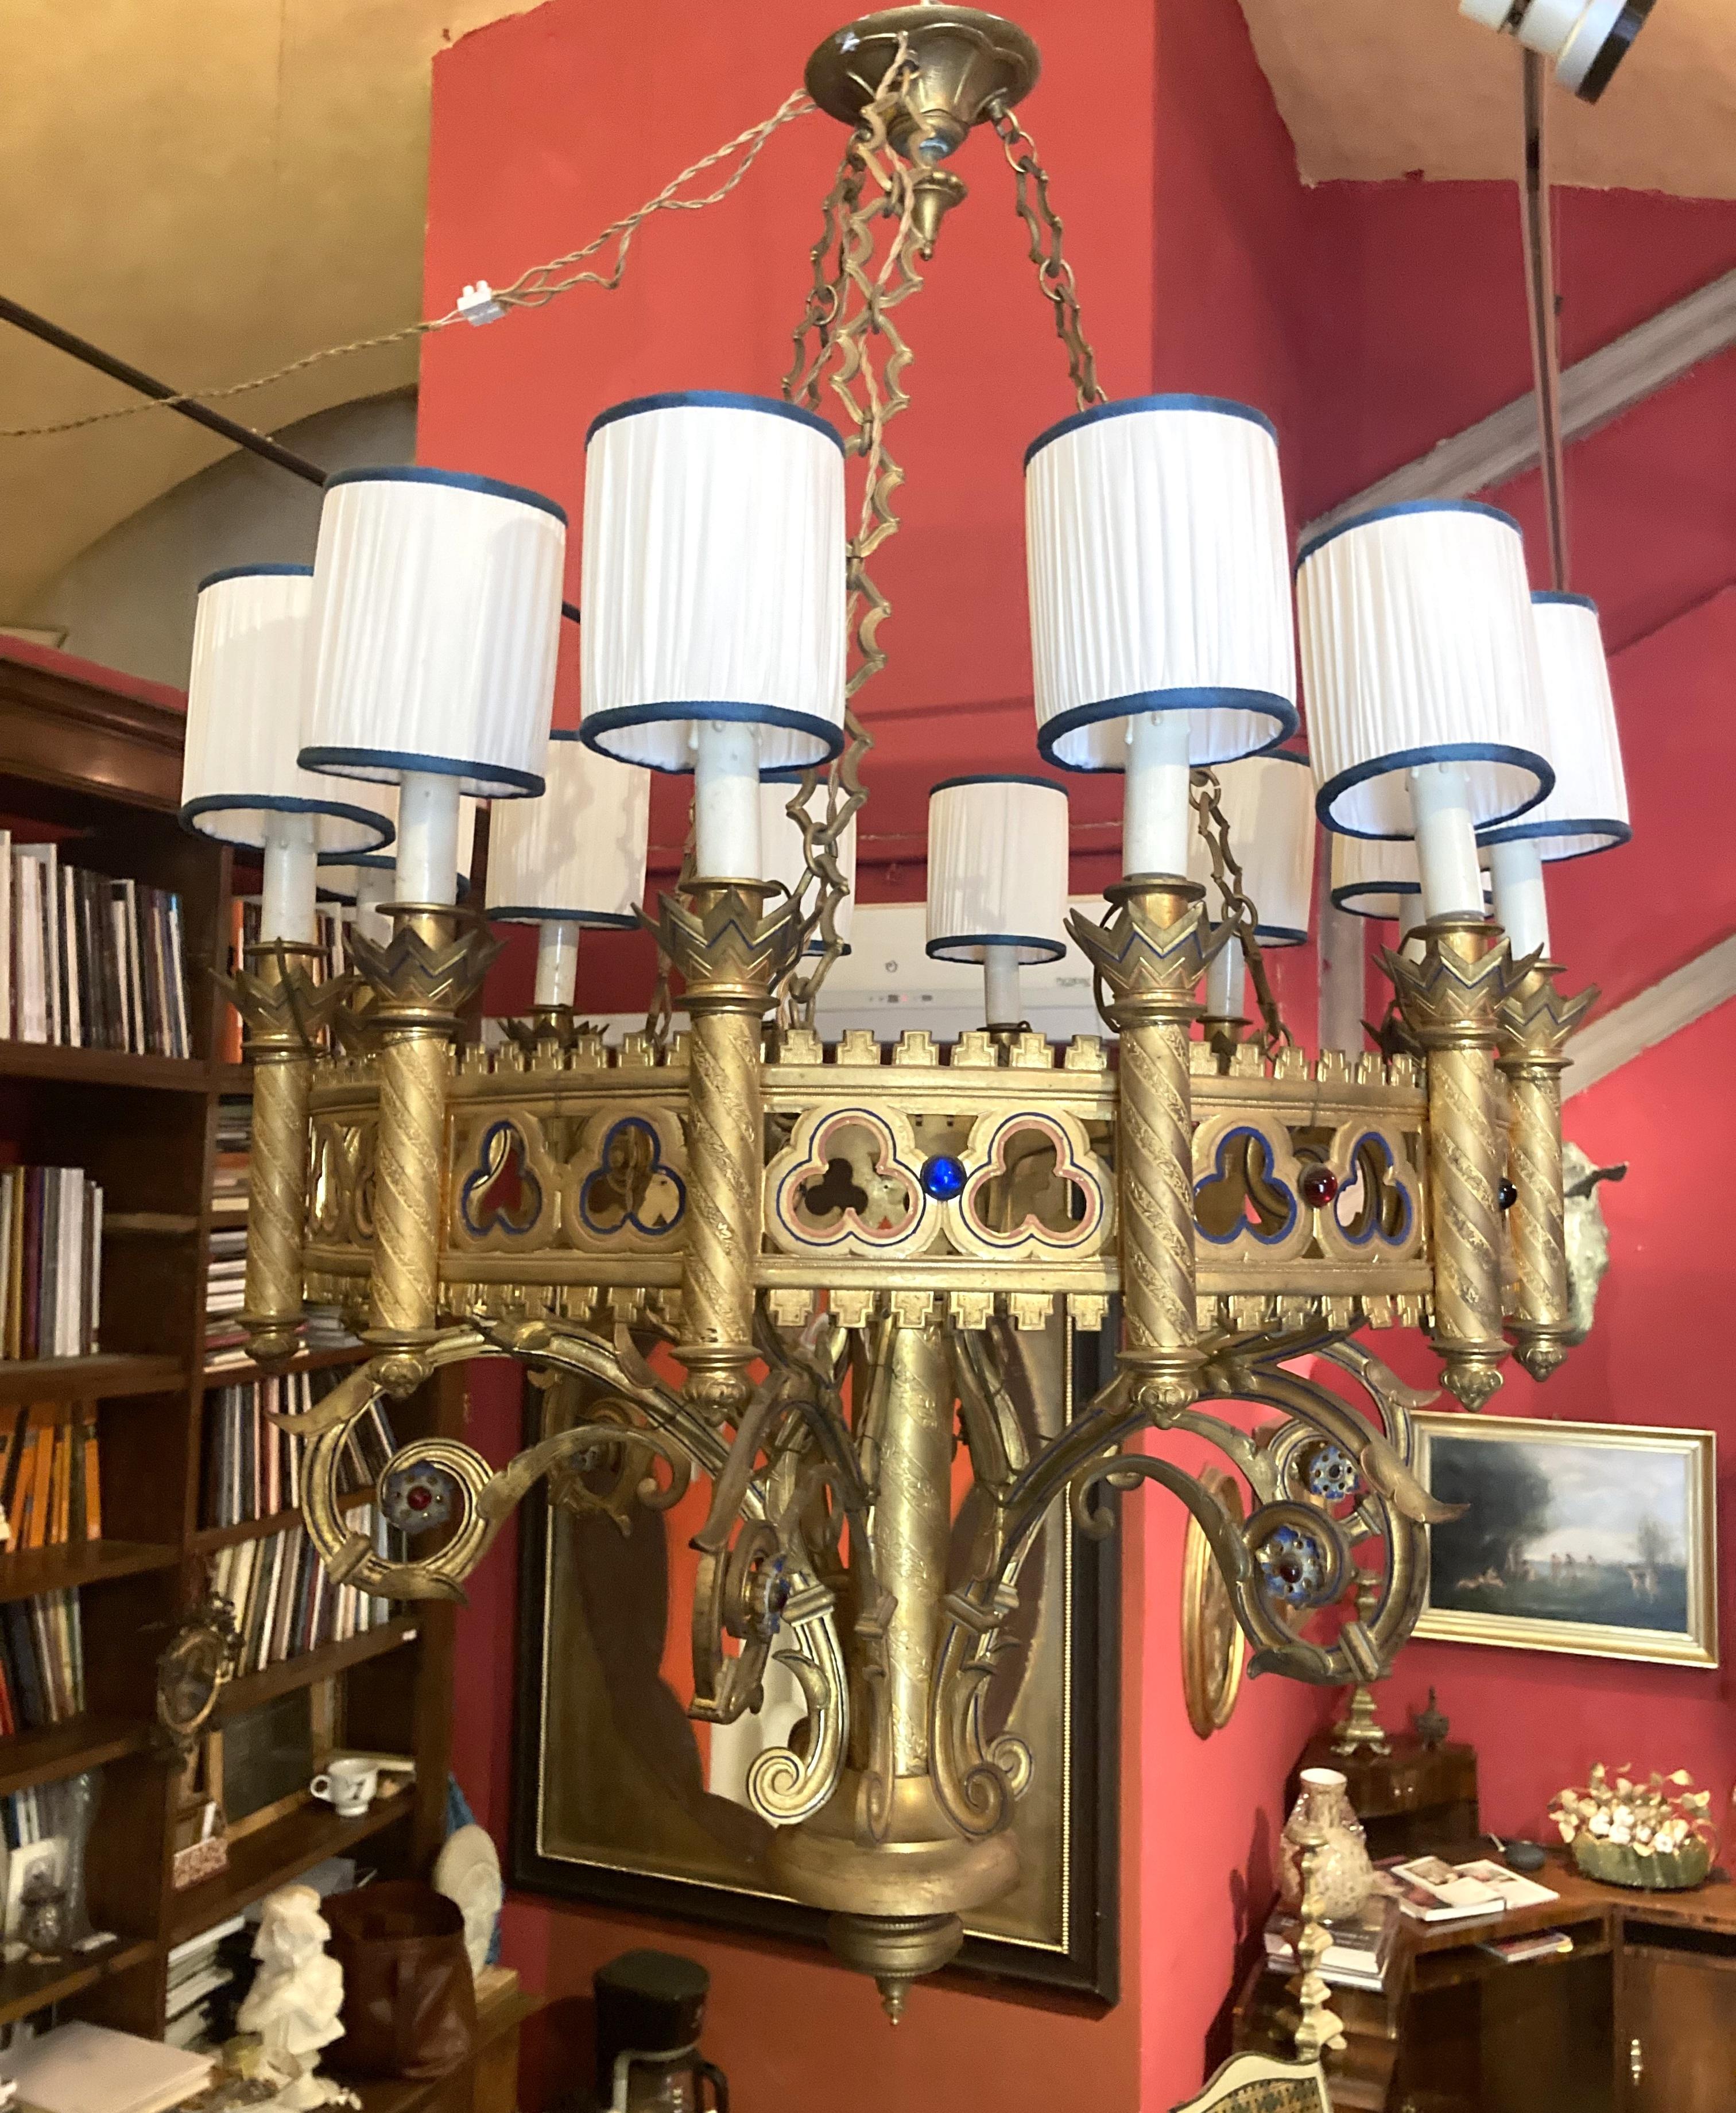 This antique 19th century Italian large gilt bronze and enameld Neo Gothic pendant chandelier dating back to 1850 circa is a stunning handcrafted light fixture designed in the shape of an advent wreath with quatrefoil pierced and scalloped hoops,